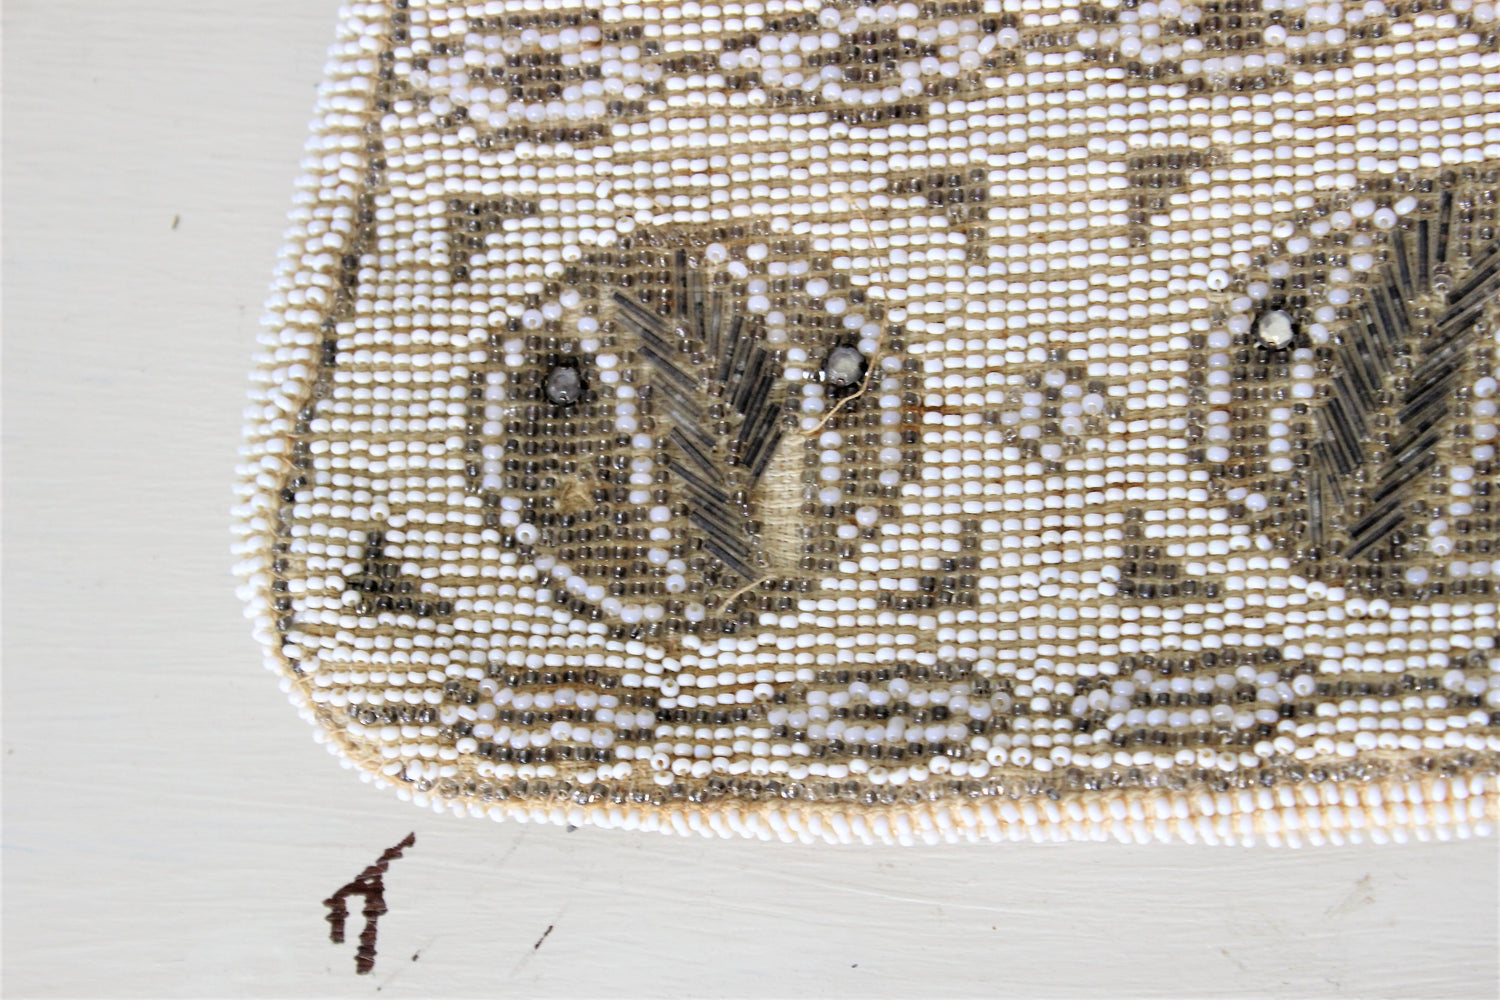 1940s Beaded Clutch Purse Covered In Faux Pearls – Toadstool Farm Vintage